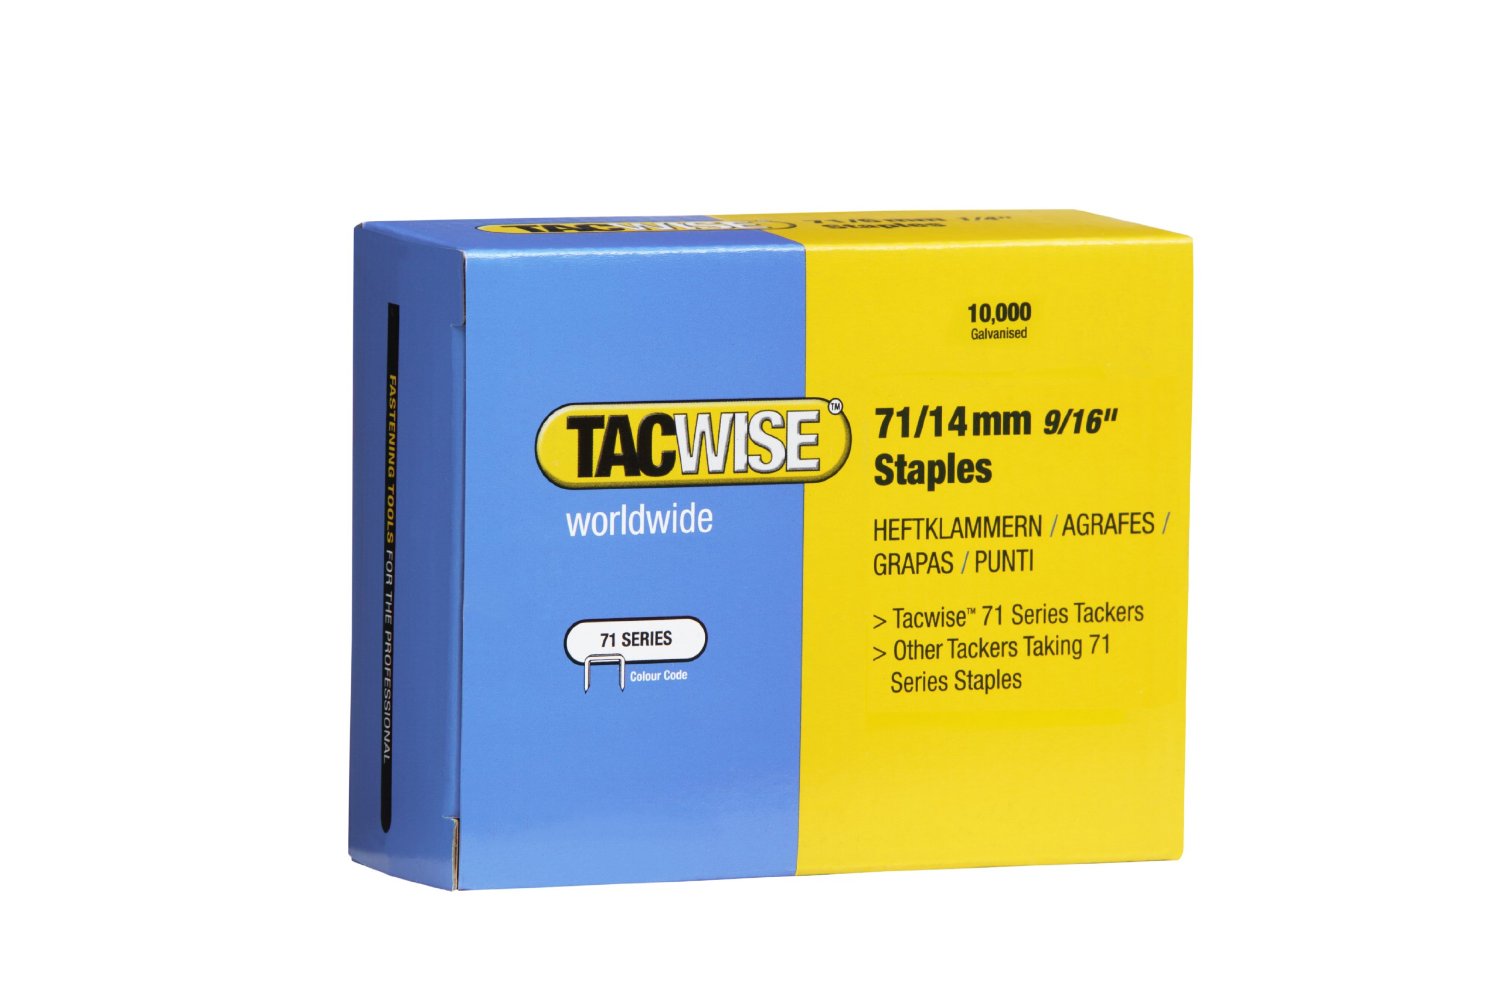 Tacwise 71 Series Staples 20,000 Box - Black Barn Upholstery Supplies